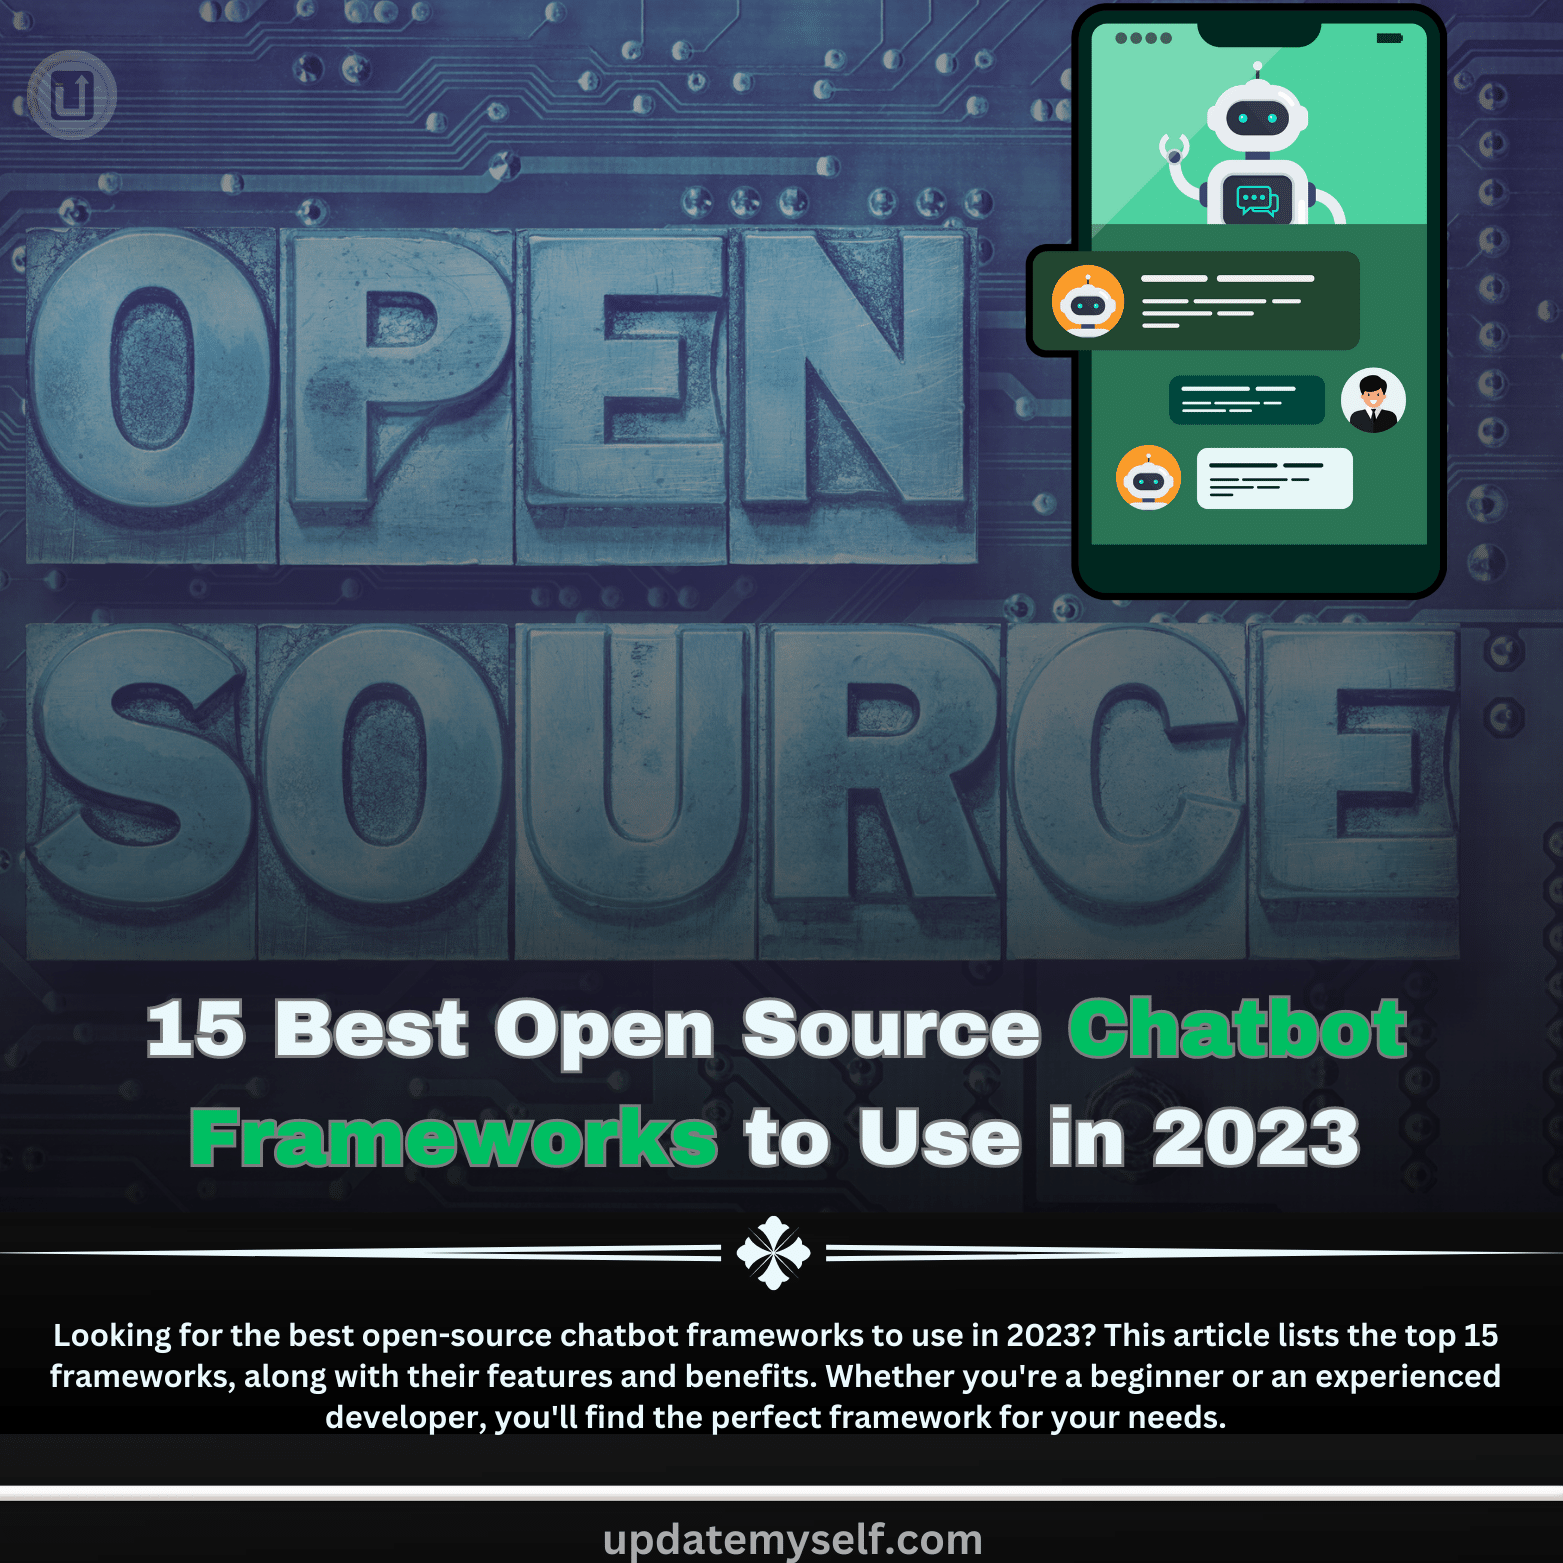 Best Open Source Chatbot Frameworks to Use in 2023